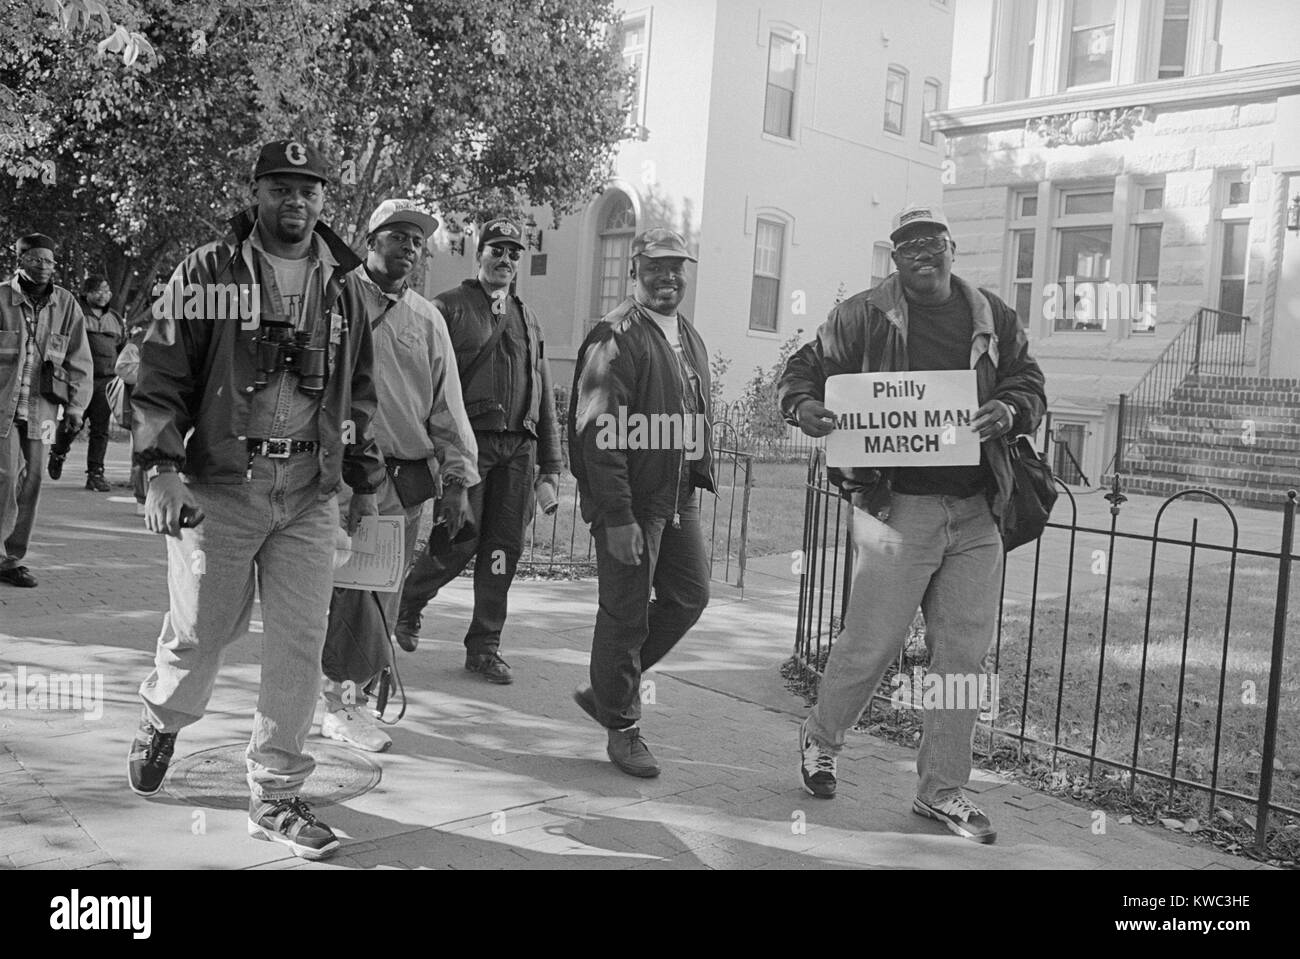 African American men walking on Capitol Hill, during the Million Man March in Washington, D.C. Oct. 16, 1995. The March's purpose was to 'convey to the world a vastly different picture of the Black male' and 'To unite in self-help and self-defense against economic and social ills.' (BSLOC 2015 14 108) Stock Photo